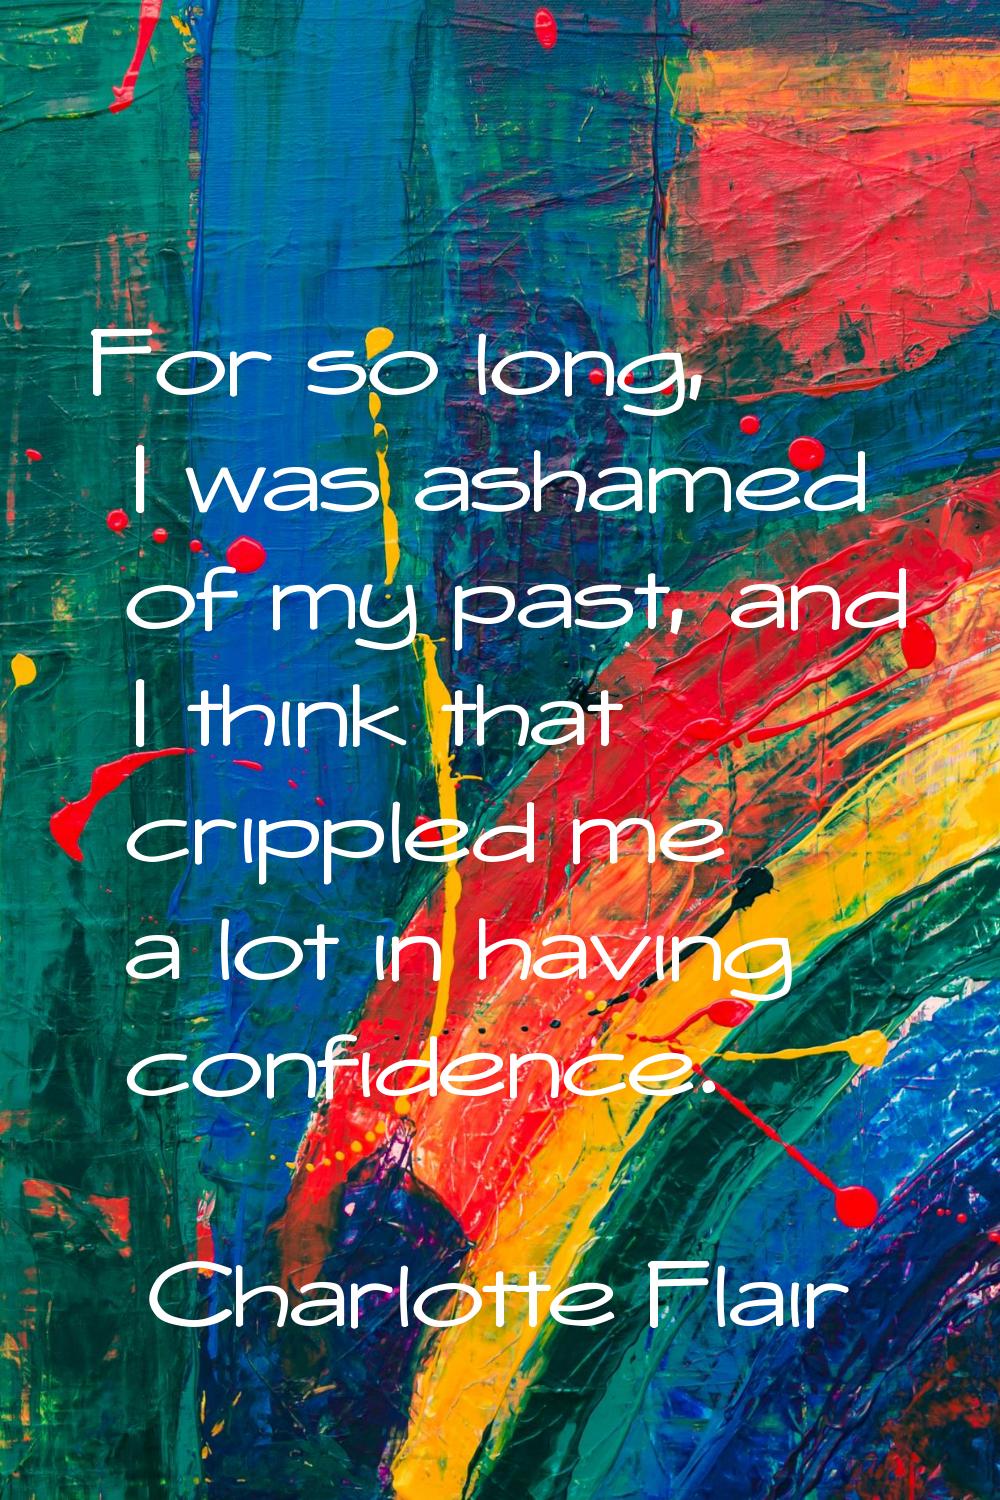 For so long, I was ashamed of my past, and I think that crippled me a lot in having confidence.